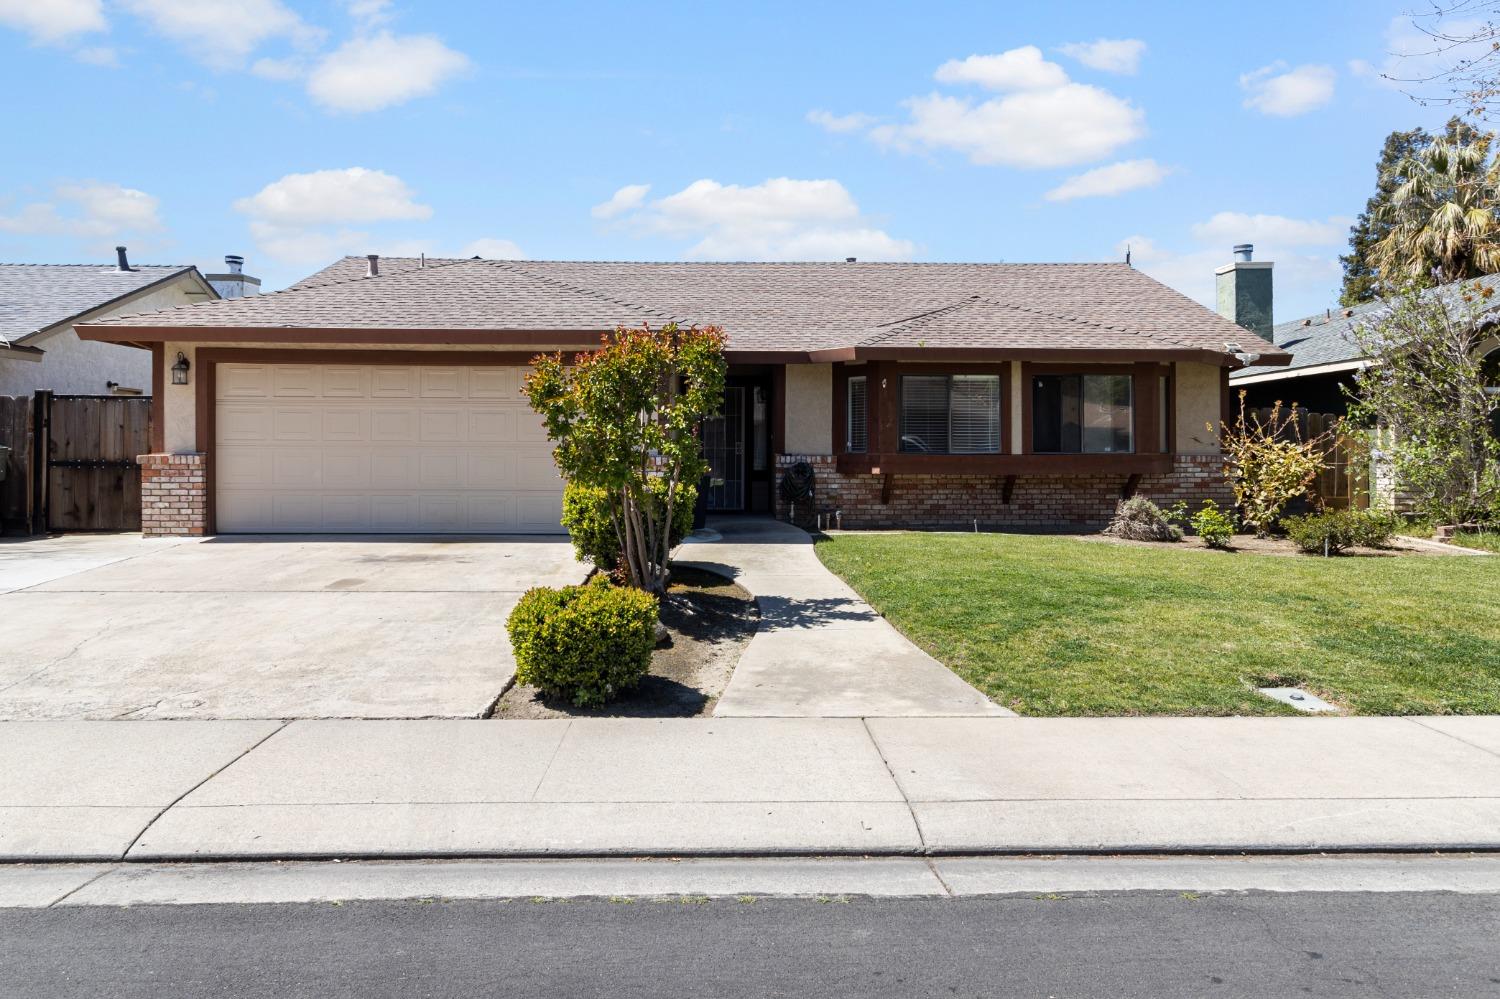 Photo of 4013 Hennings Dr in Modesto, CA